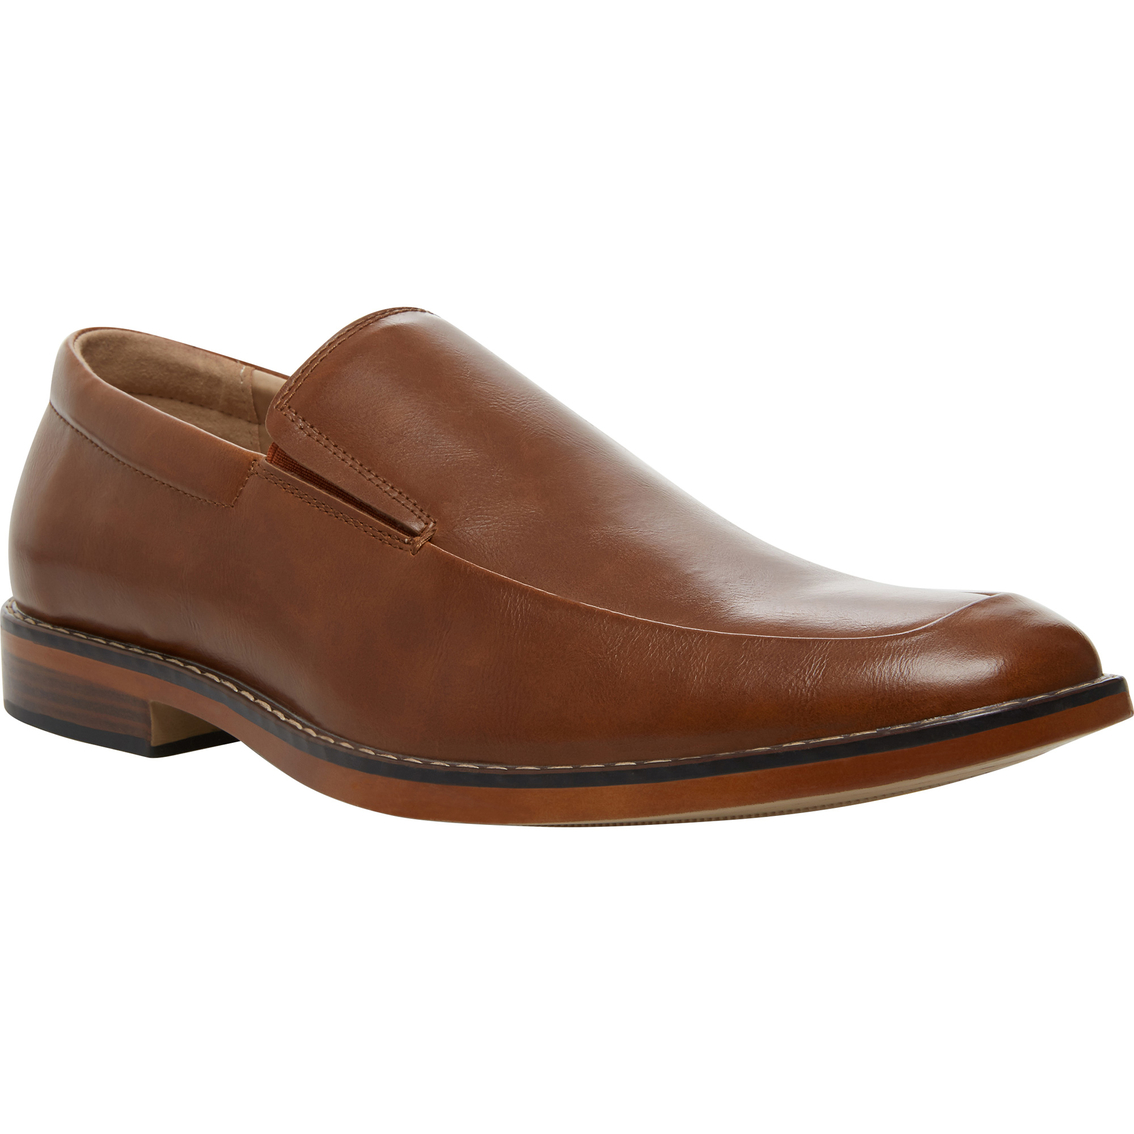 Steve Madden Grant Slip On Loafer Shoes | Casuals | Shoes | Shop The ...